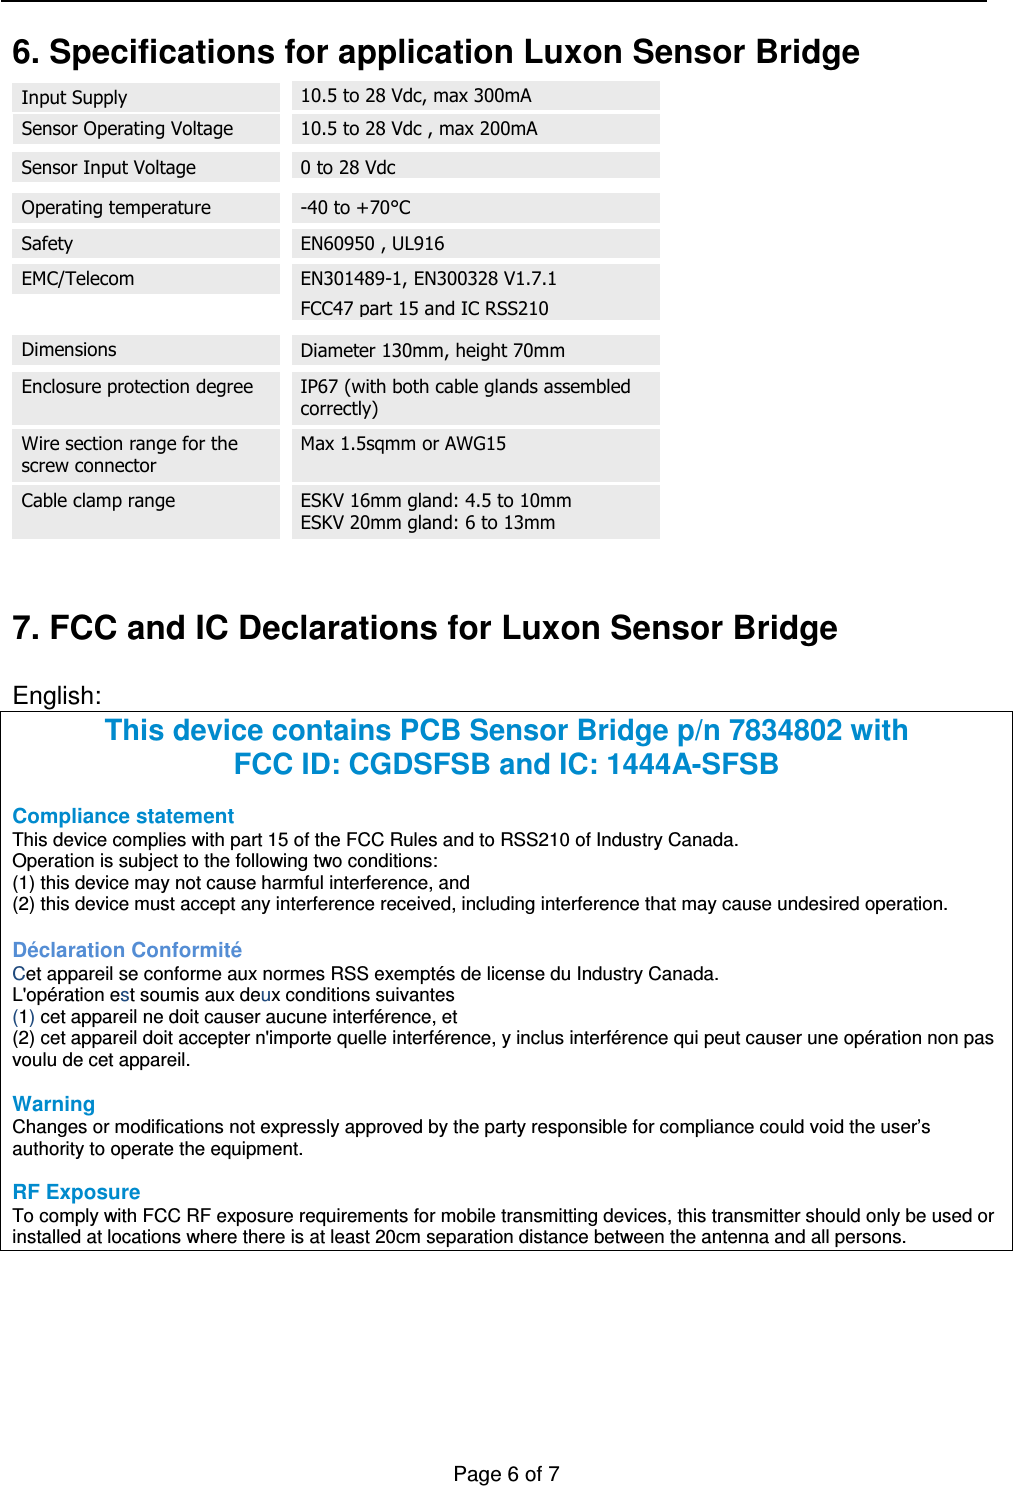   Page 6 of 7    6. Specifications for application Luxon Sensor Bridge                      7. FCC and IC Declarations for Luxon Sensor Bridge  English: This device contains PCB Sensor Bridge p/n 7834802 with FCC ID: CGDSFSB and IC: 1444A-SFSB  Compliance statement  This device complies with part 15 of the FCC Rules and to RSS210 of Industry Canada. Operation is subject to the following two conditions: (1) this device may not cause harmful interference, and (2) this device must accept any interference received, including interference that may cause undesired operation.  Déclaration Conformité Cet appareil se conforme aux normes RSS exemptés de license du Industry Canada.  L&apos;opération est soumis aux deux conditions suivantes  (1) cet appareil ne doit causer aucune interférence, et  (2) cet appareil doit accepter n&apos;importe quelle interférence, y inclus interférence qui peut causer une opération non pas voulu de cet appareil.  Warning  Changes or modifications not expressly approved by the party responsible for compliance could void the user’s authority to operate the equipment.  RF Exposure To comply with FCC RF exposure requirements for mobile transmitting devices, this transmitter should only be used or installed at locations where there is at least 20cm separation distance between the antenna and all persons.  Operating temperature Safety EMC/Telecom -40 to +70°C EN60950 , UL916 EN301489-1, EN300328 V1.7.1  FCC47 part 15 and IC RSS210 Wire section range for the screw connector Enclosure protection degree     IP67 (with both cable glands assembled correctly) Dimensions Diameter 130mm, height 70mm  Max 1.5sqmm or AWG15  ESKV 16mm gland: 4.5 to 10mm ESKV 20mm gland: 6 to 13mm  Cable clamp range Input Supply   10.5 to 28 Vdc, max 300mA  10.5 to 28 Vdc , max 200mA  Sensor Operating Voltage Sensor Input Voltage 0 to 28 Vdc 